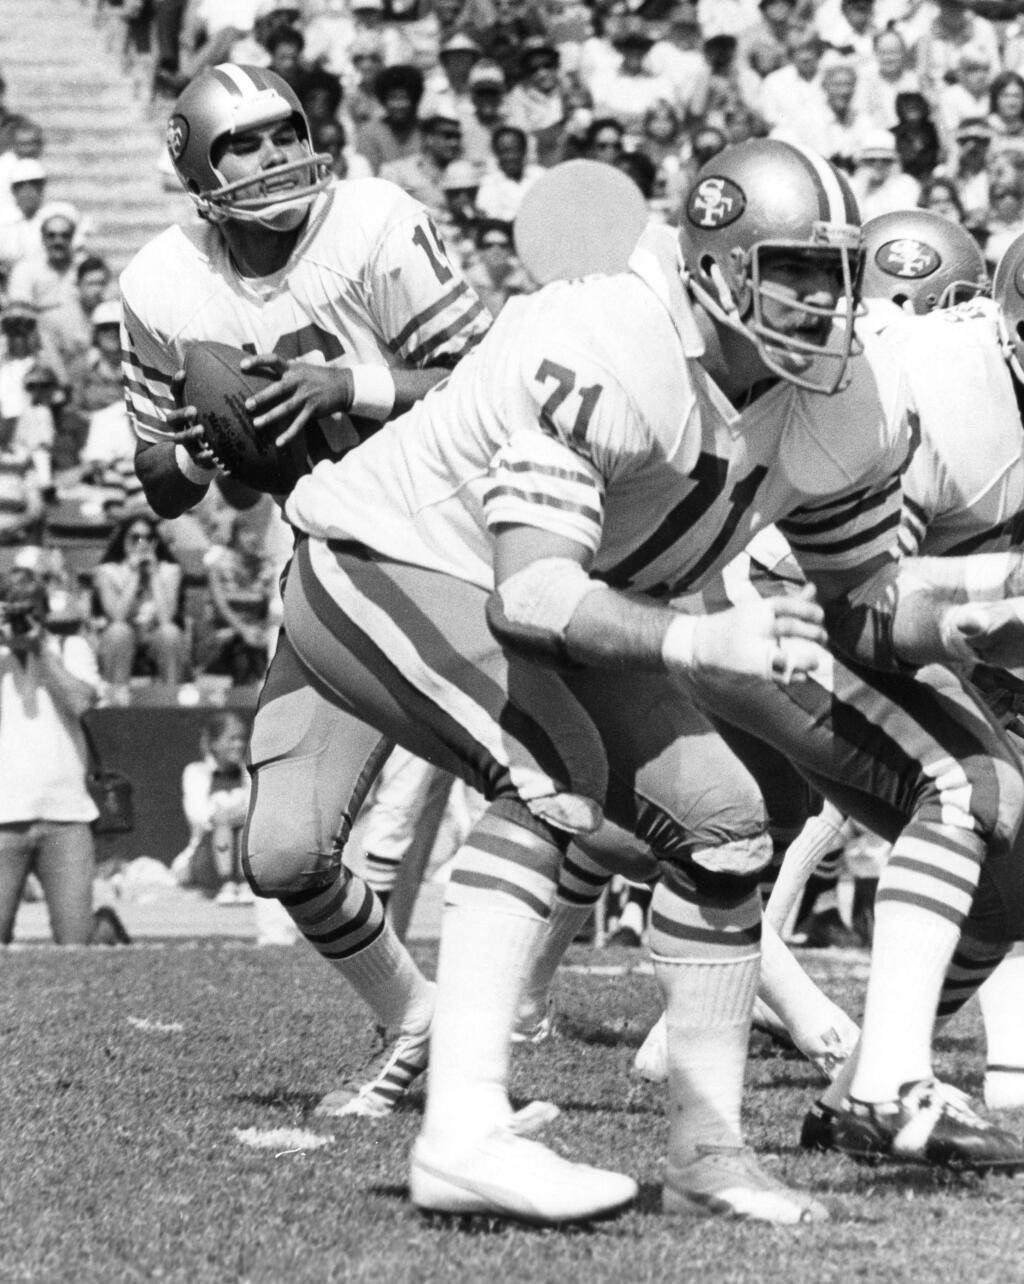 This Oct. 2, 1977, photo provided by the NFL shows San Francisco 49ers tackle Keith Fahnhorst (71) blocking for quarterback Jim Plunkett (16) as he drops back to pass against the Los Angeles Rams, at Los Angeles Memorial Coliseum. Former star San Francisco 49ers tackle Keith Fahnhorst has died at 66. The team said Friday he died Tuesday, June 12, 2018. No cause was given. (NFL Photos via AP)